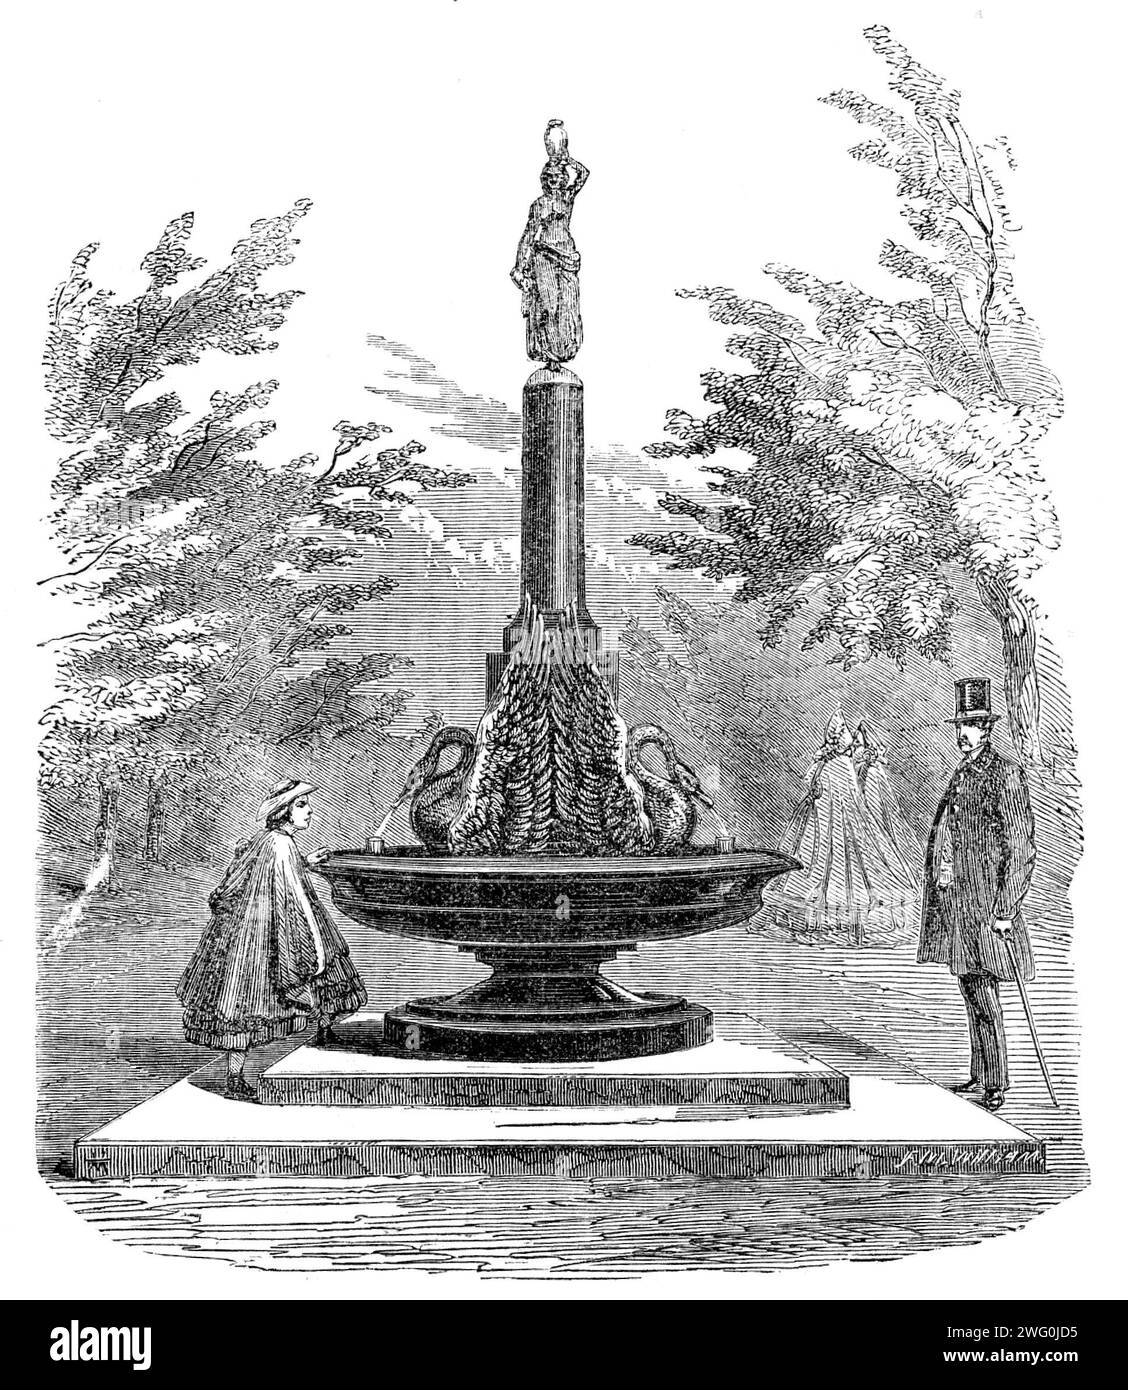 Drinking-fountain in the Regent's Park, [London], 1862. 'Under the direction of the First Commissioner of her Majesty's Public Works, the Hon. W. Cowper, a drinking-fountain has recently been erected in Regent's Park, from the design of Professor Westmacott, R.A. It was executed by Mr. J. Sherwood Westmacott. The structure consists of a tazza of black enamelled slate, 7ft. in diameter, resting on two steps of Portland stone, of which the lower is 11ft. square. On the tazza are two swans in electrotype, from whose bills the water is projected. Above these is a red granite column and base, surmo Stock Photo